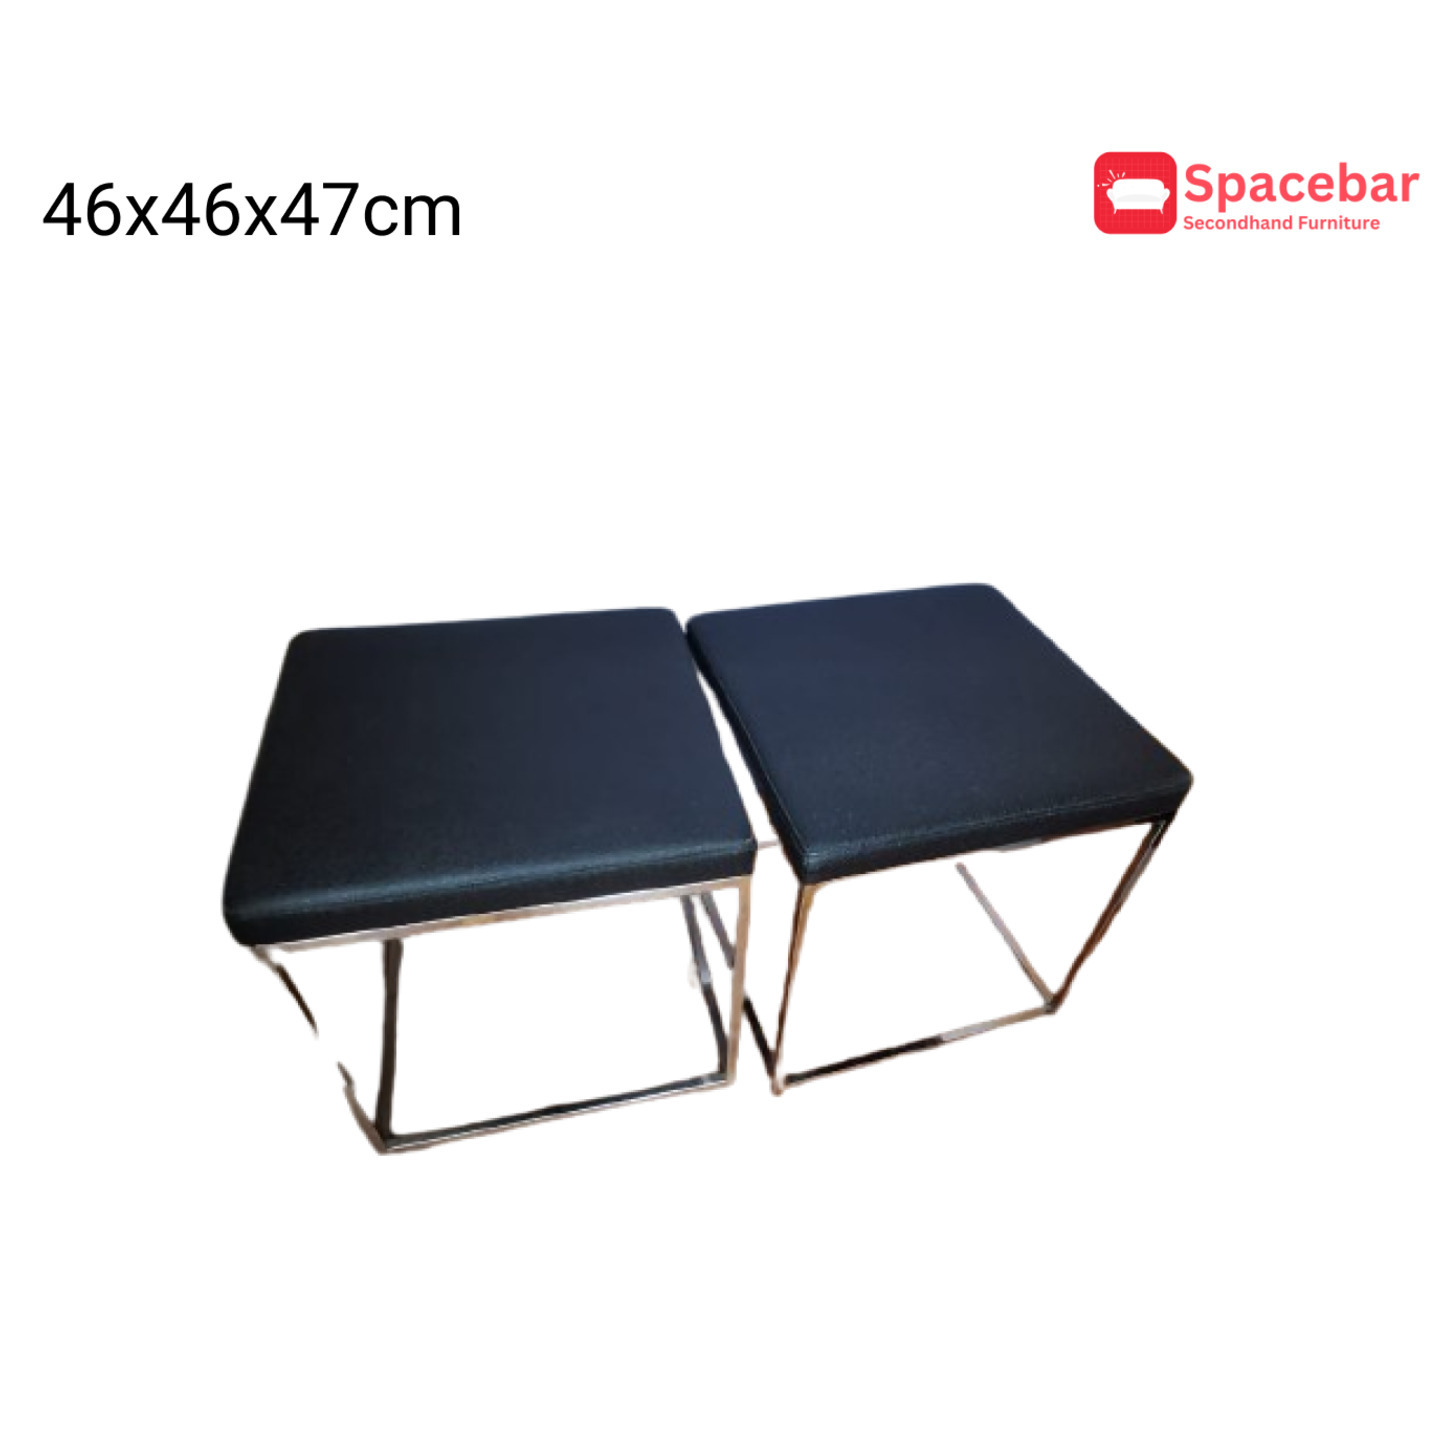 Two Leather Stool 